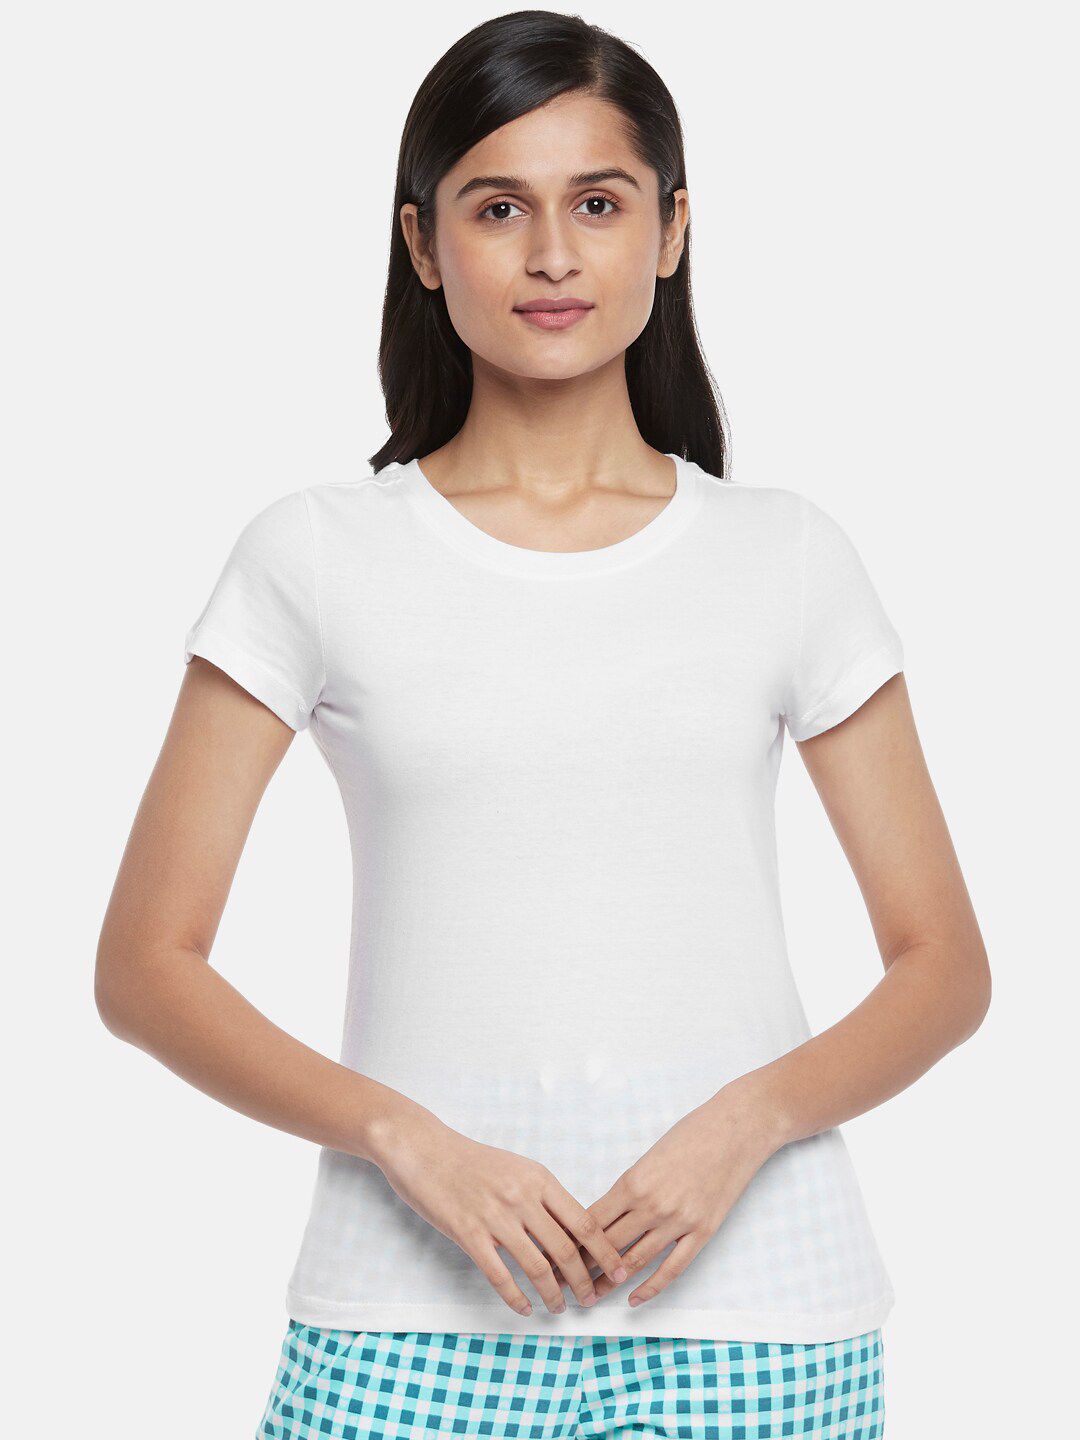 Dreamz by Pantaloons Women White Solid Pure Cotton Lounge T-shirt Price in India